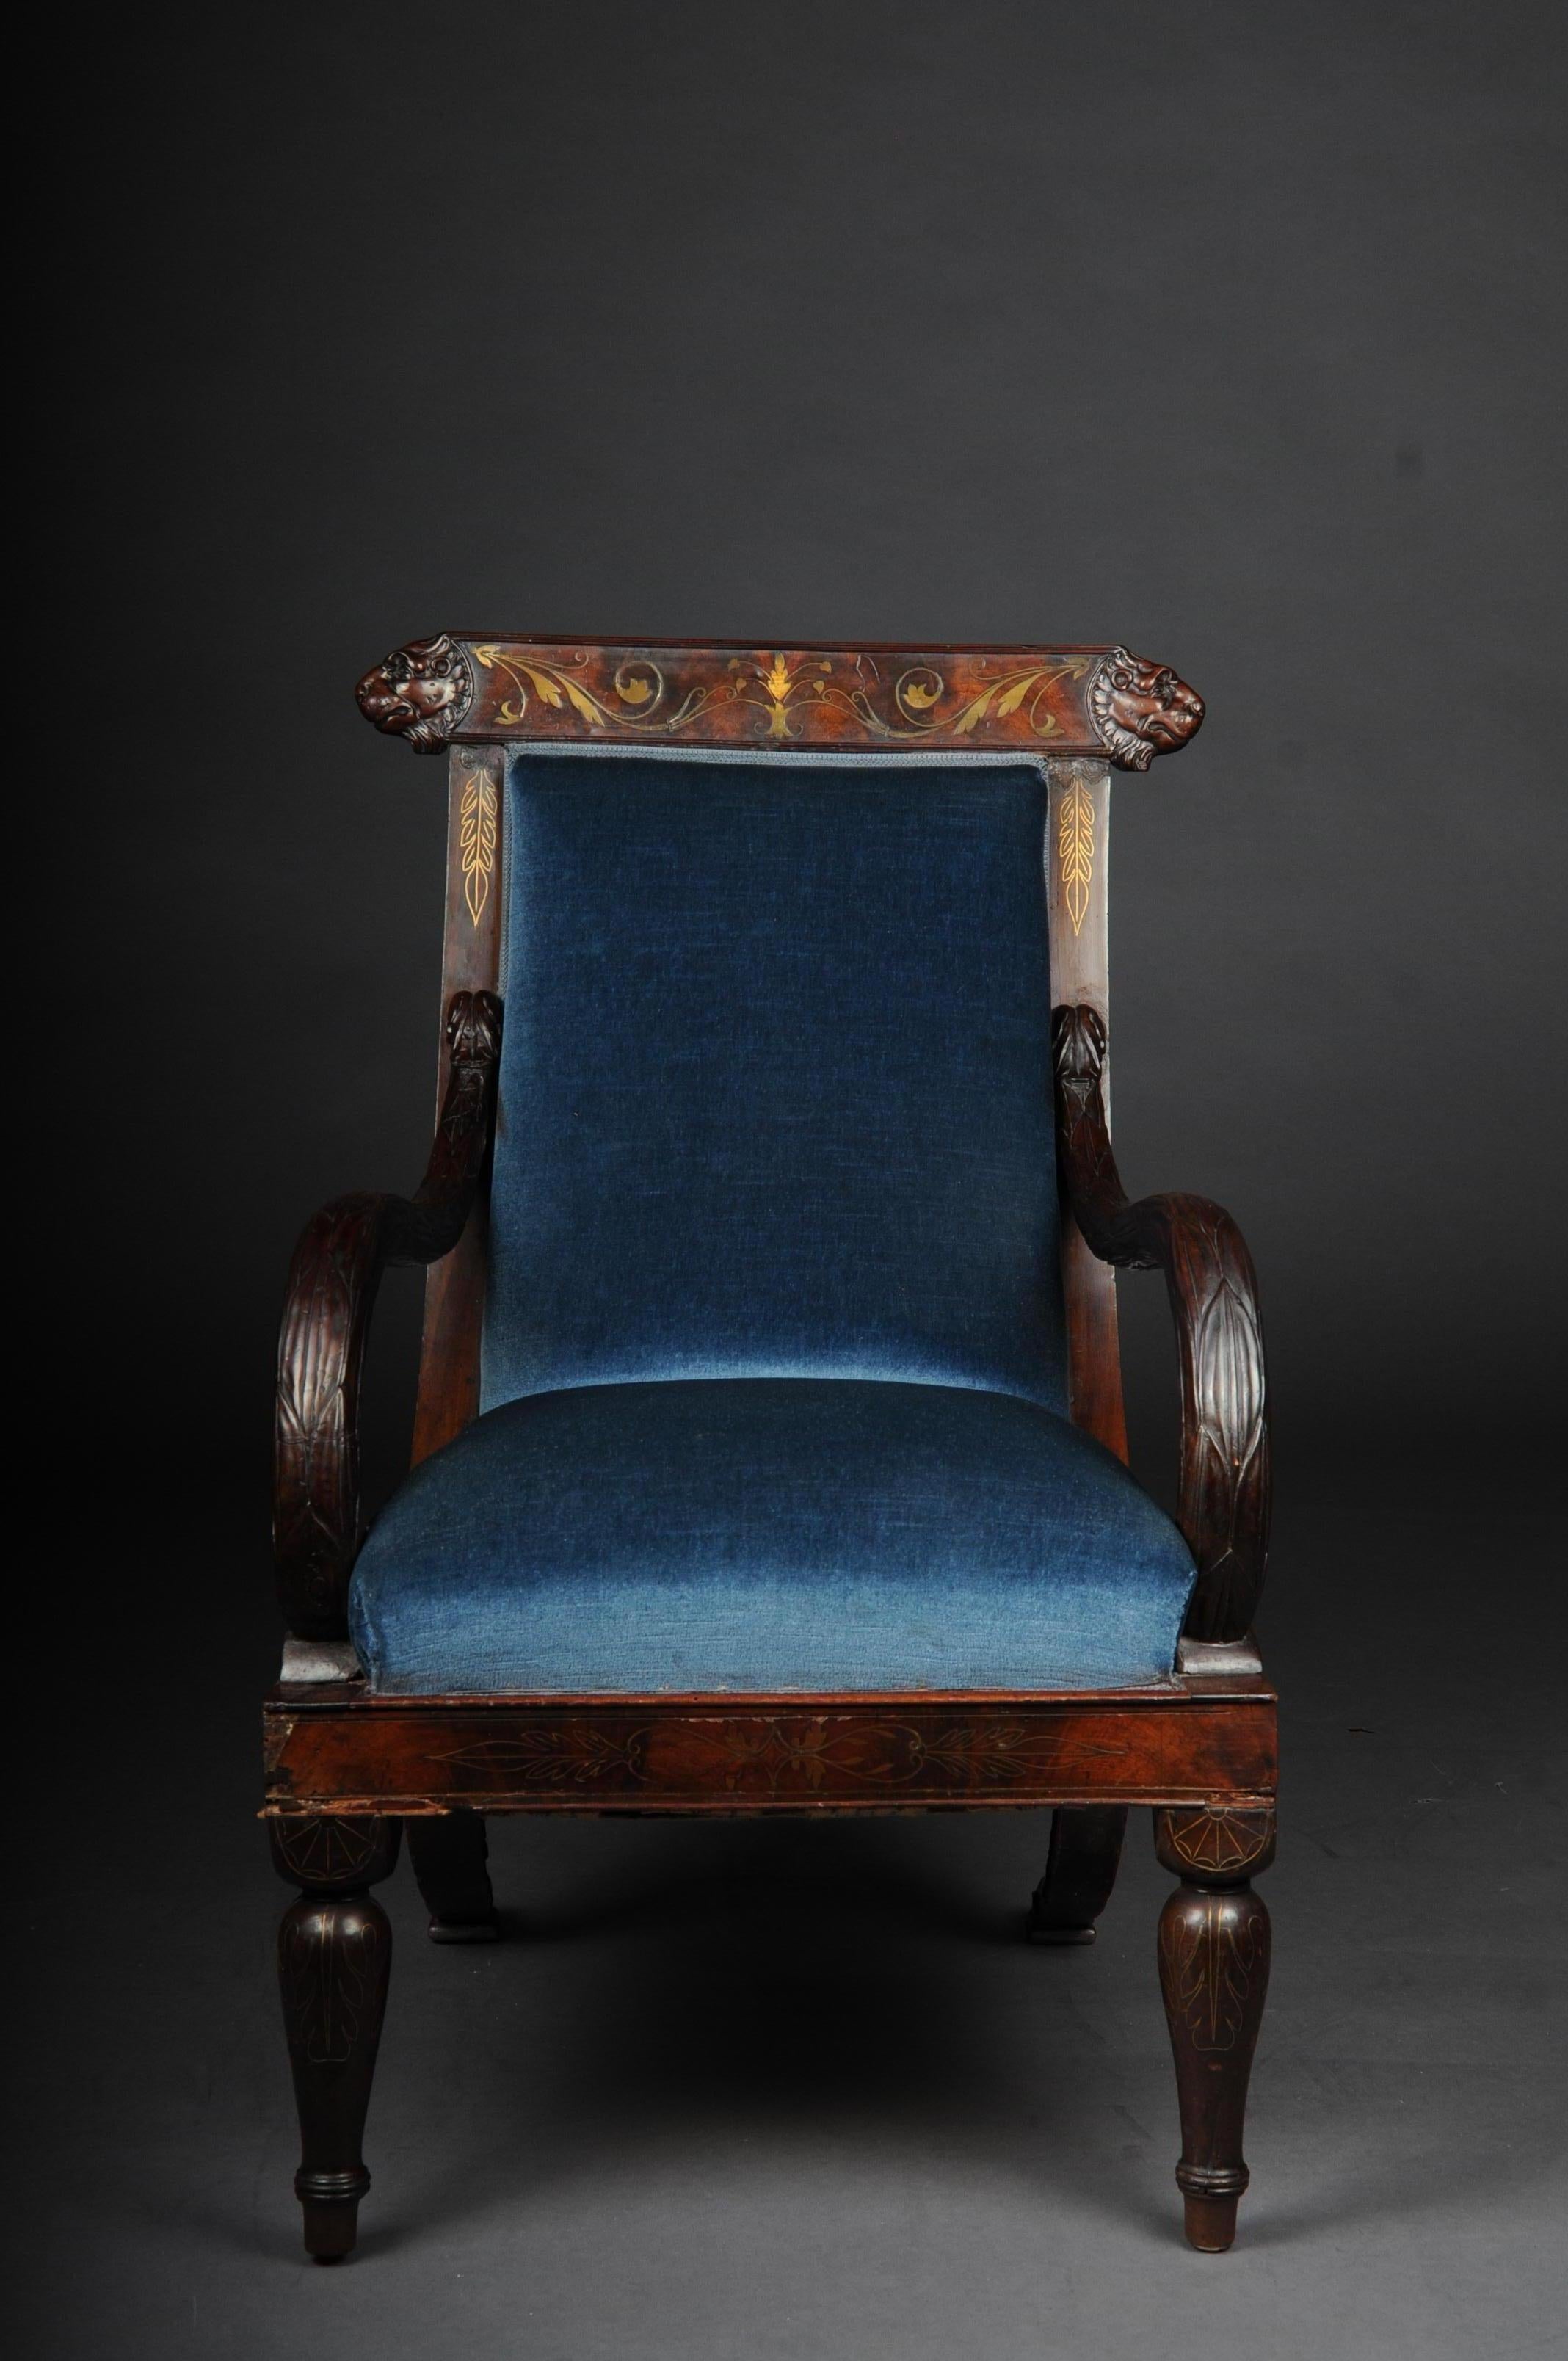 Museum court Empire armchair circa 1830, mahogany

Solid mahogany body. Empire beginning of the 19th century. Armrests, curved volute-shaped, ending in carved dolphins. Rectangular backrest framing flanked by classicist carved lion heads and